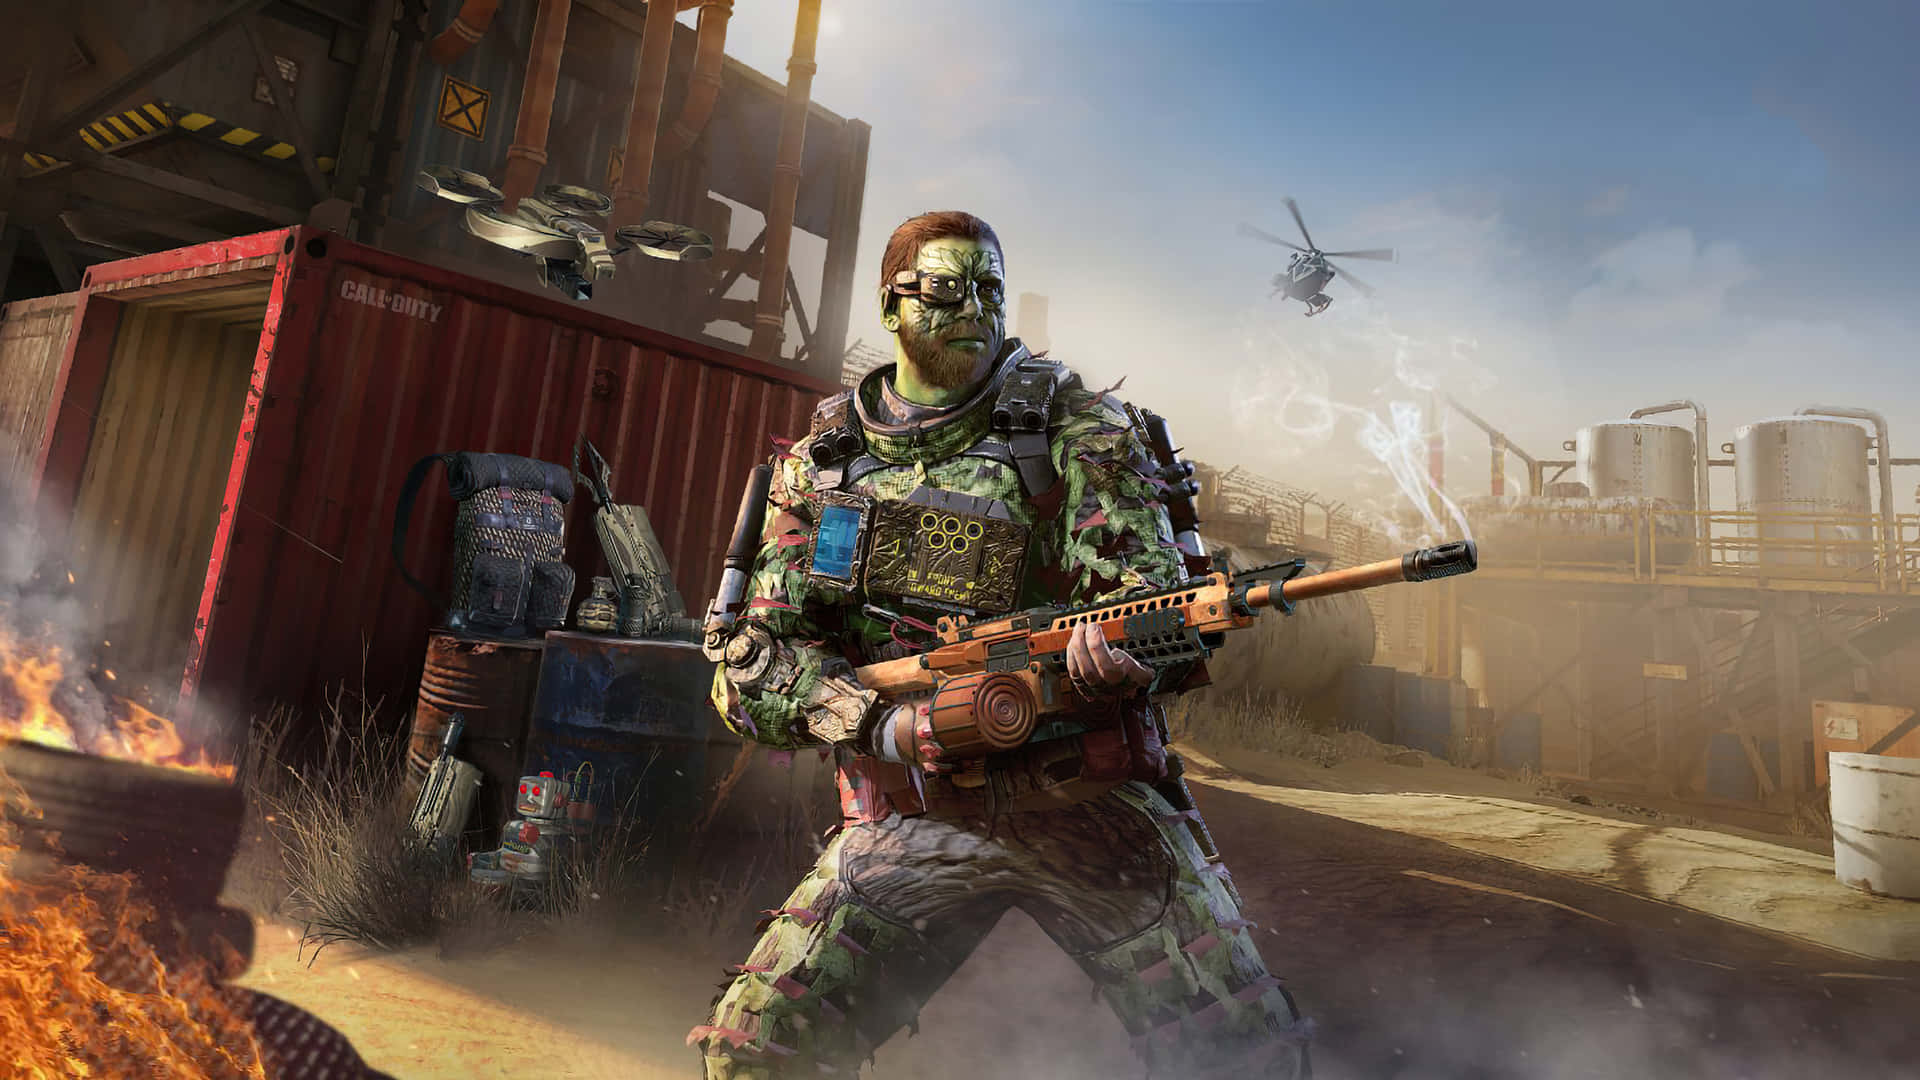 Wars, Battles, Weapons and More As Call Of Duty 2020 Approaches! Wallpaper